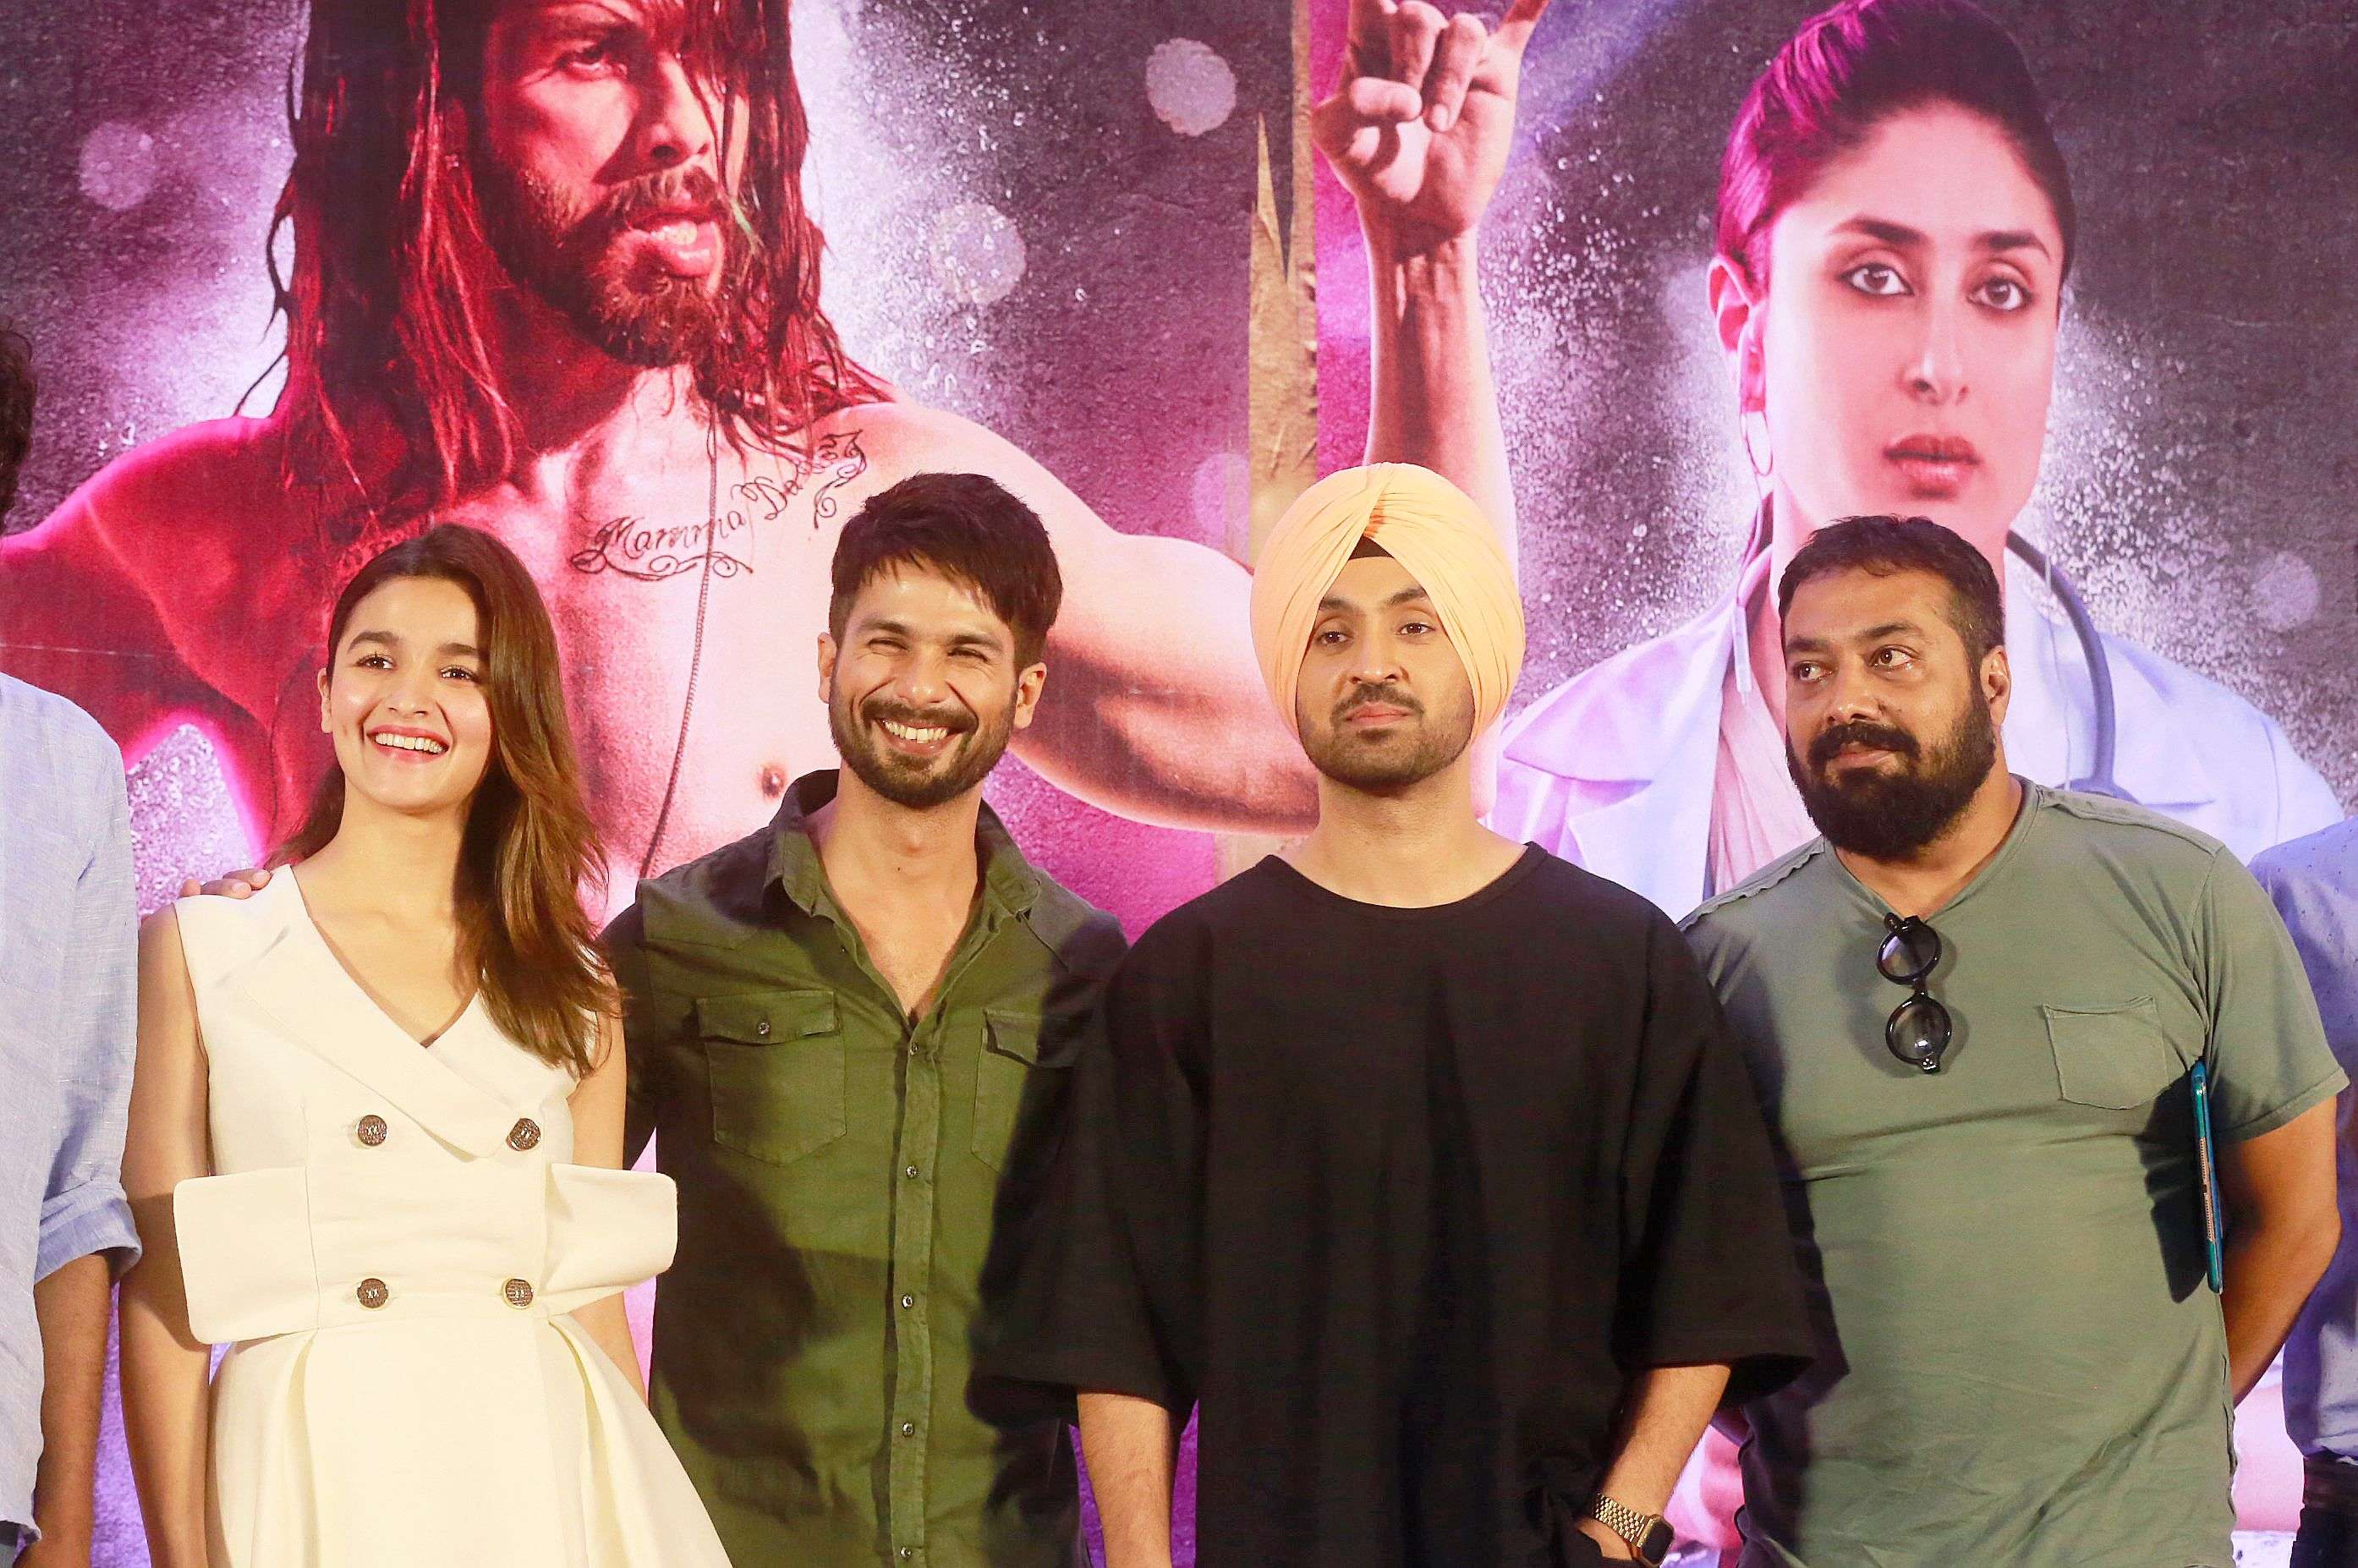 Bollywood film "Udta Punjab," or "Flying Punjab" actors from left, Alia Bhatt,  Shahid Kapoor and Diljit Dosanjh along with film producer Anurag Kashyap pose for photographs after a press conference of the film in Mumbai, India, Tuesday, June 14, 2016. The Bollywood movie about drug abuse in India's northern state of Punjab can be released in theaters across the country with one potentially offensive scene removed, rather than the many cuts sought by censors, a court ruled Monday. The director and producers of the film had appealed to the court last week after the Censor Board sought removal of nearly 90 scenes before it would declare the film fit for screening.(AP Photo/Rafiq Maqbool)